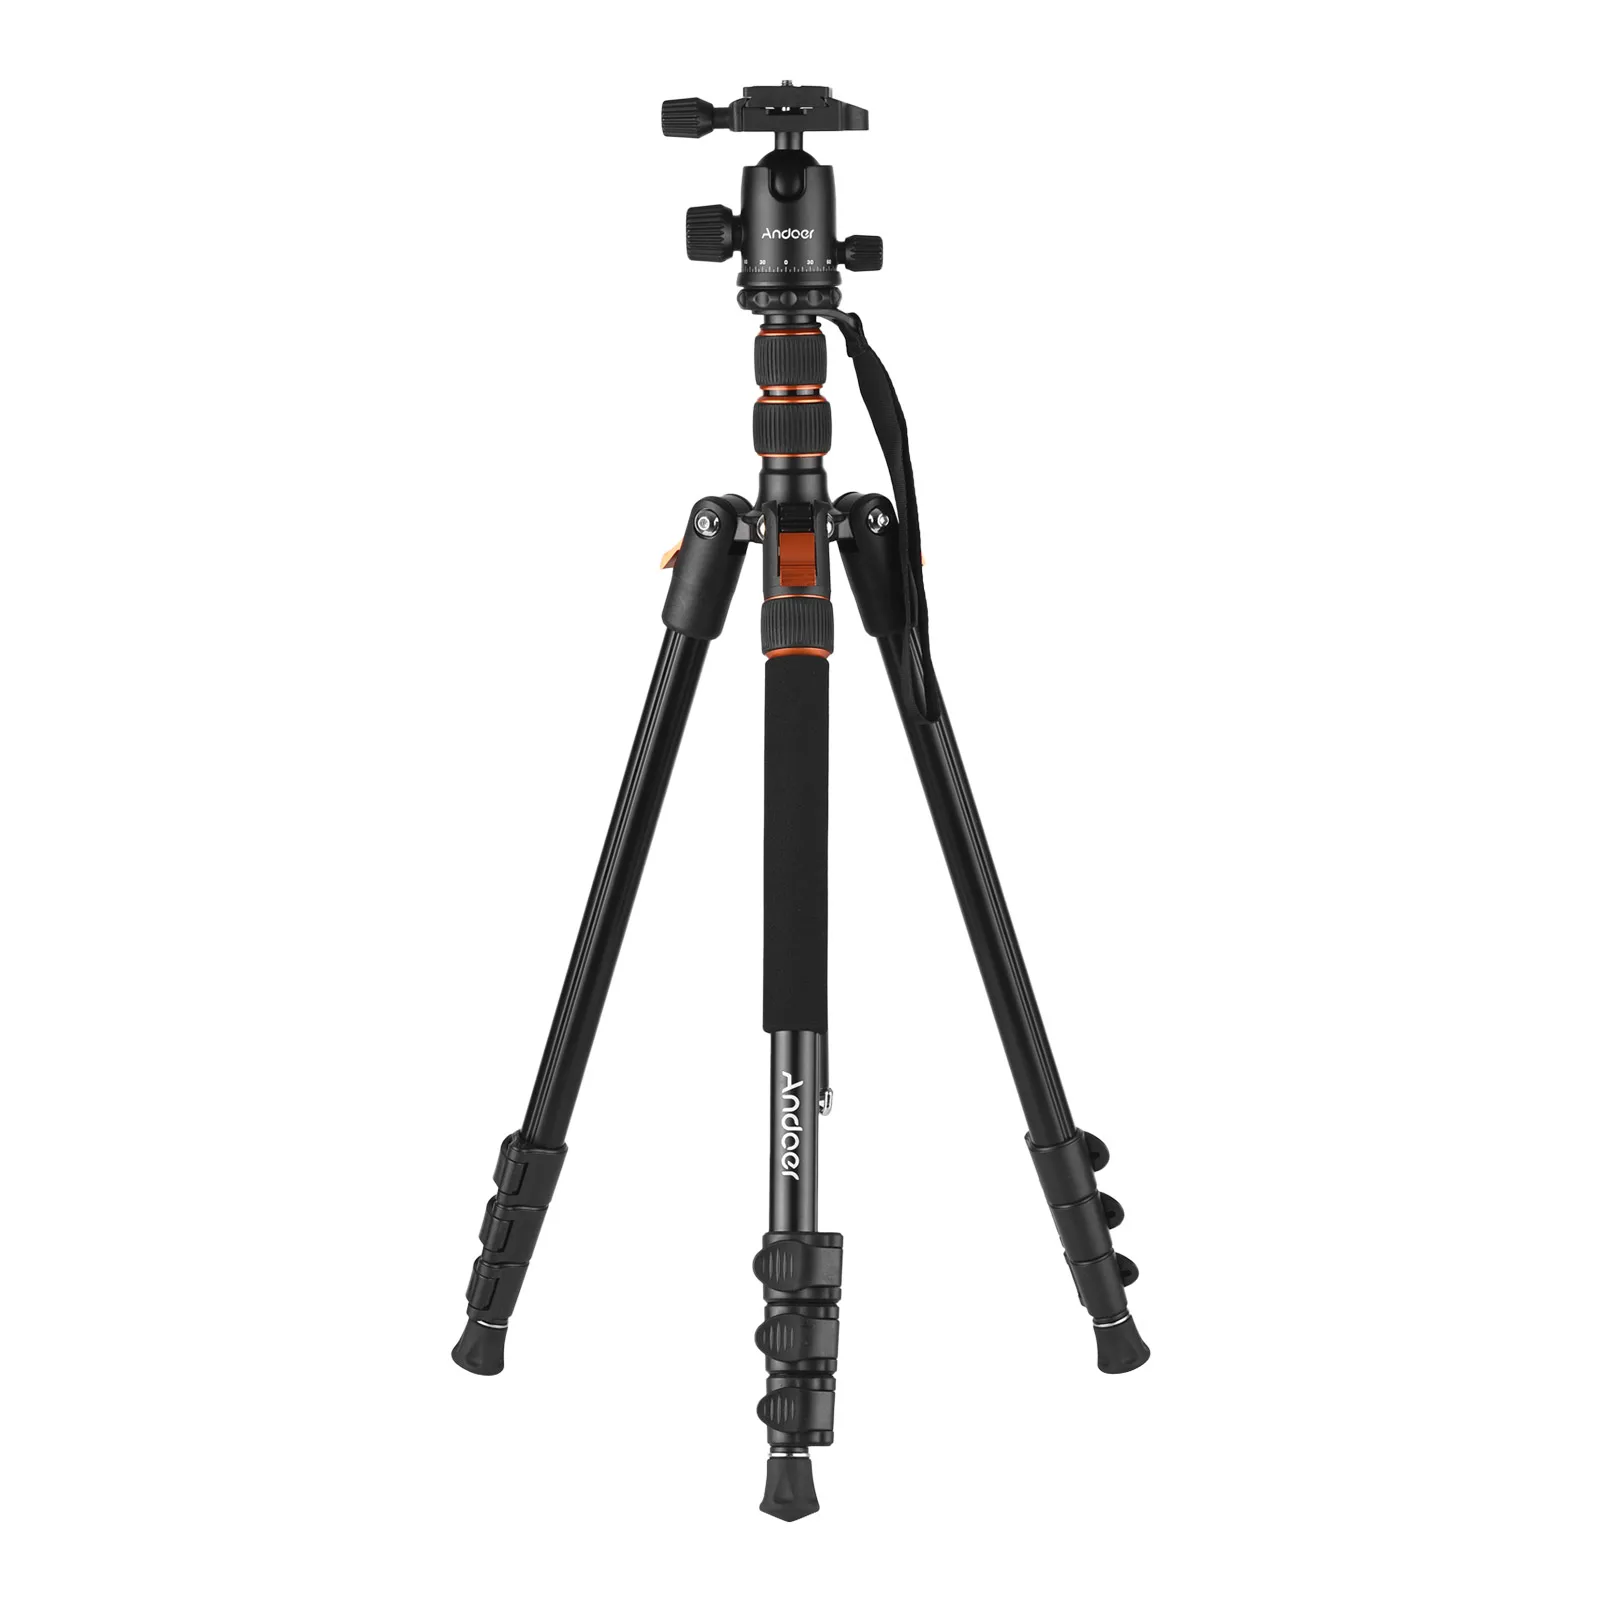 

200cm Andoer 2-in-1 Photography Tripod for phone Monopod Stand Max. Height 5kg Load Aluminium Alloy 360° Rotatable Ball Head